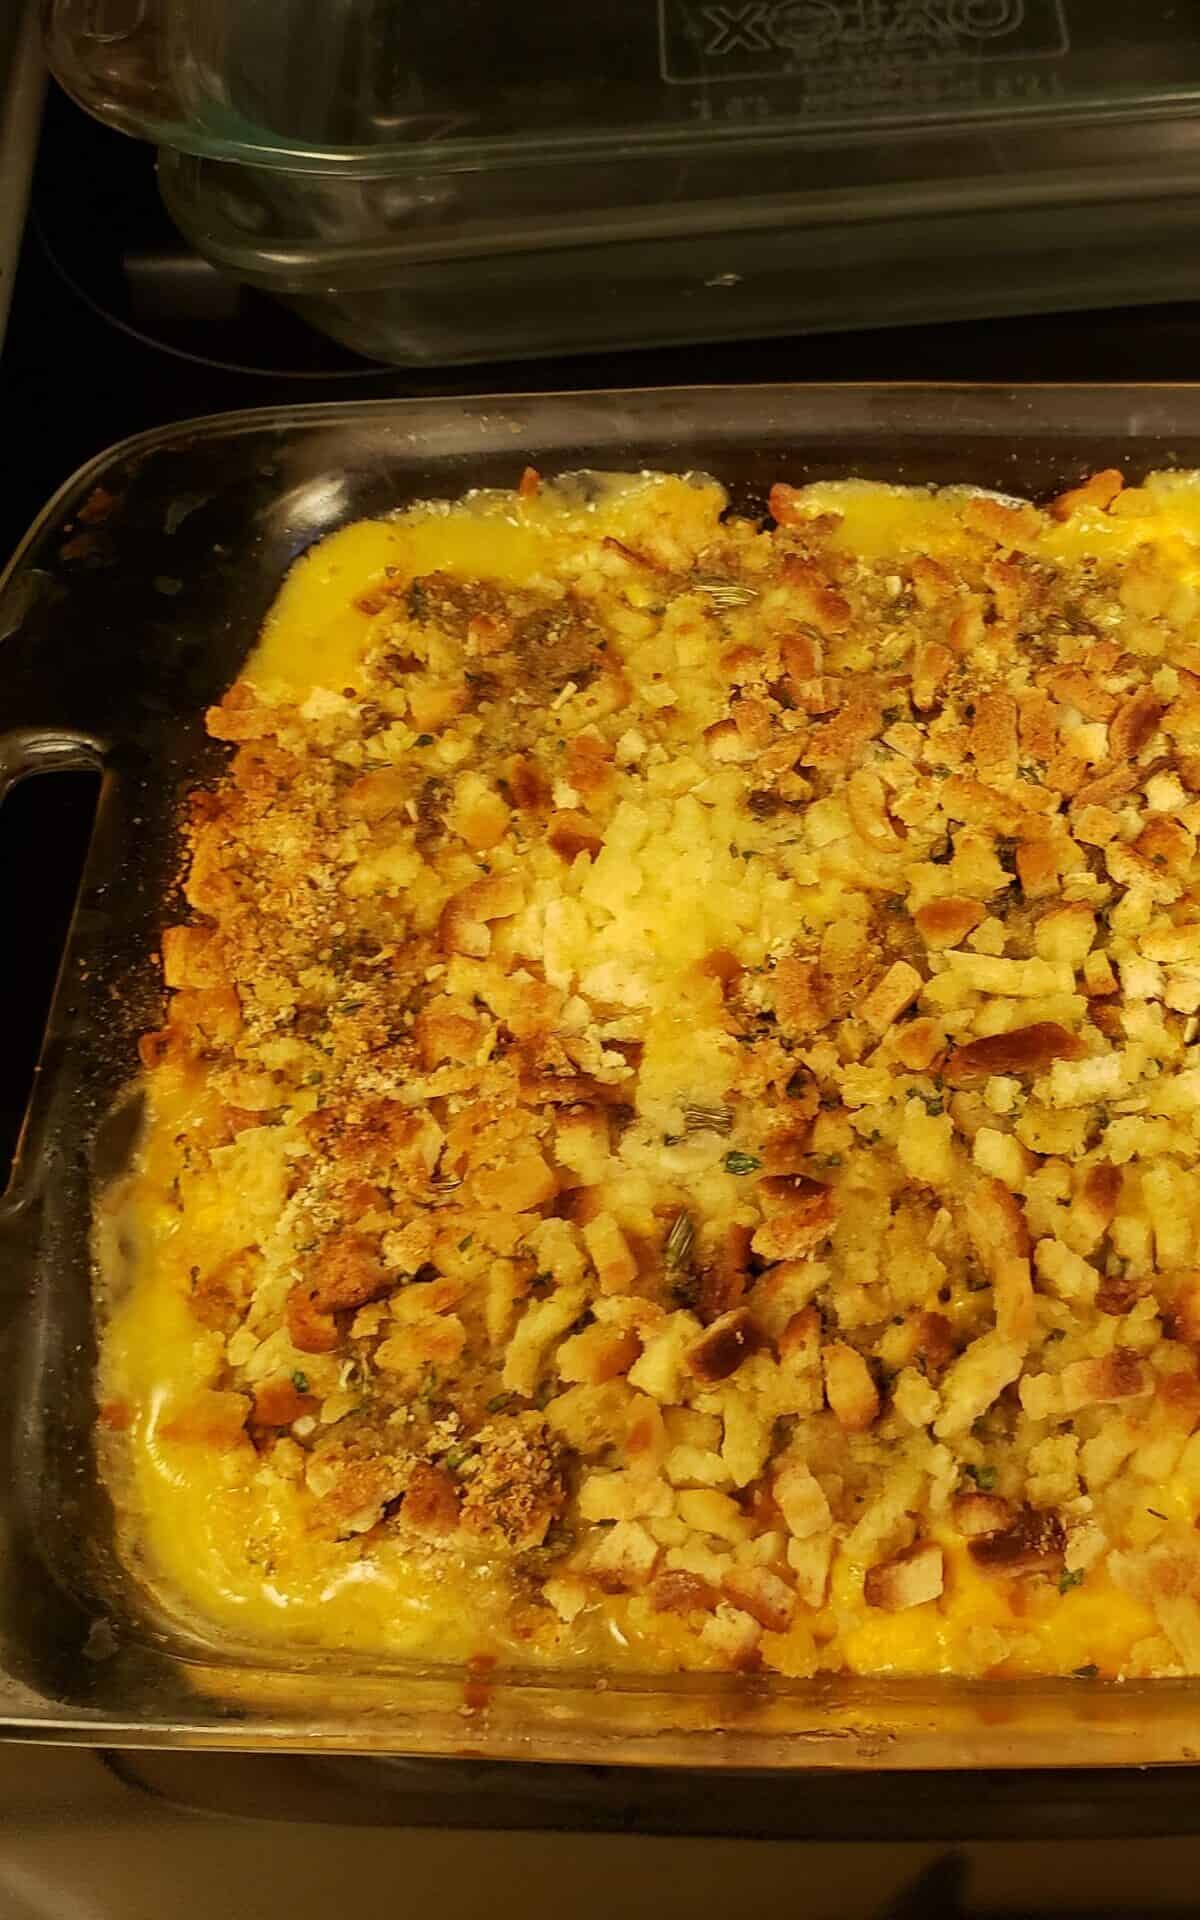  Here's the star of the show: the Chicken Crap Casserole in all its glory!